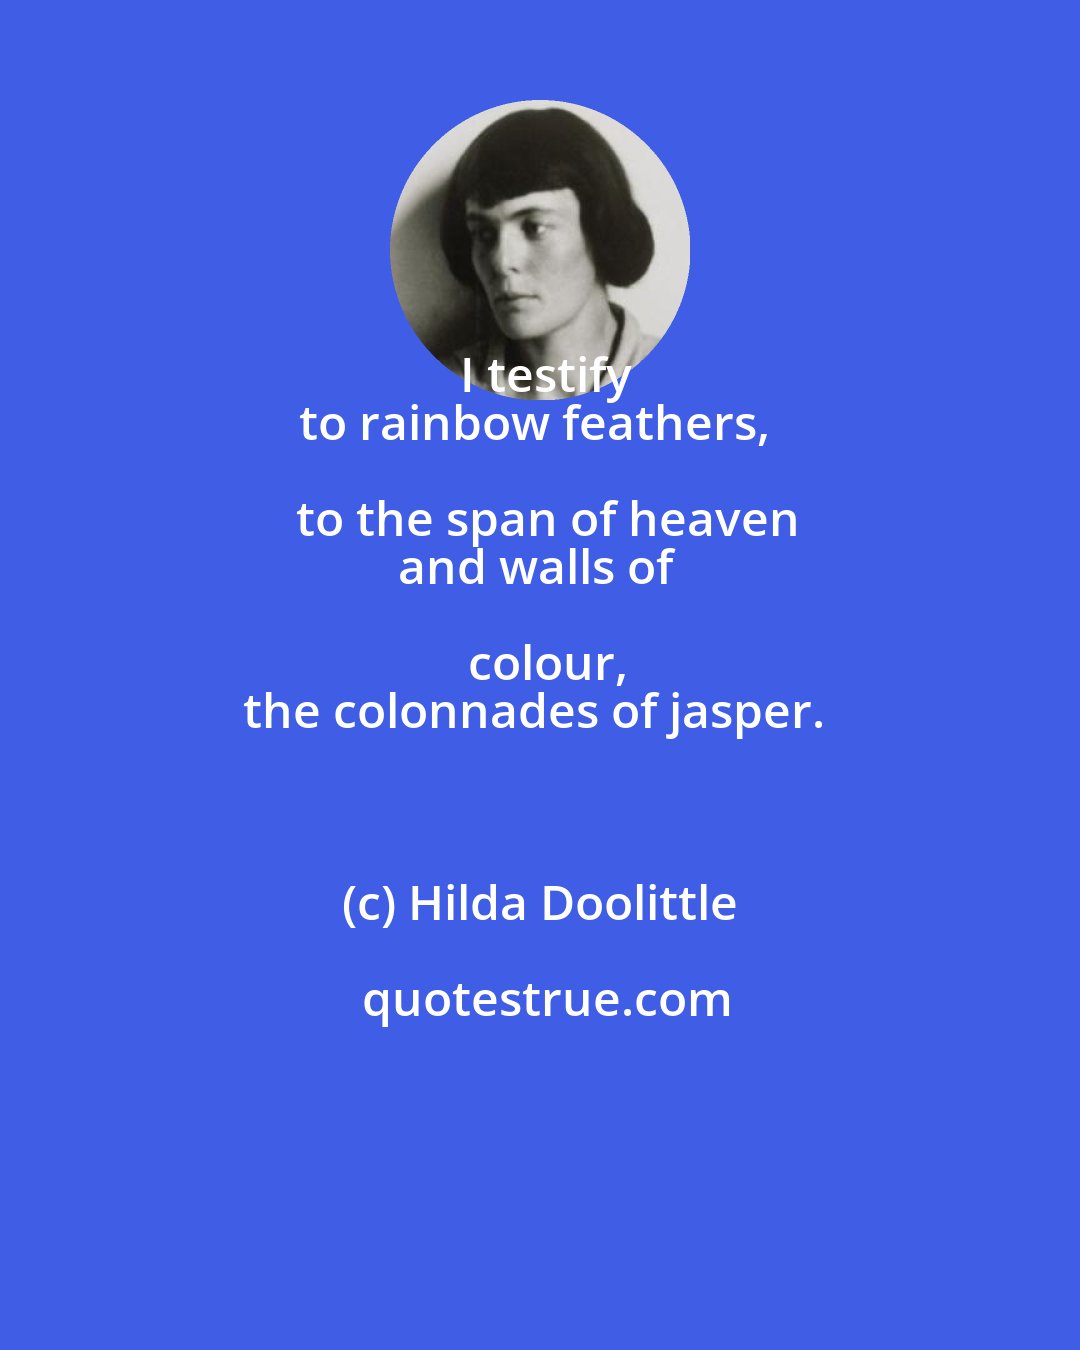 Hilda Doolittle: I testify
to rainbow feathers, to the span of heaven
and walls of colour,
the colonnades of jasper.